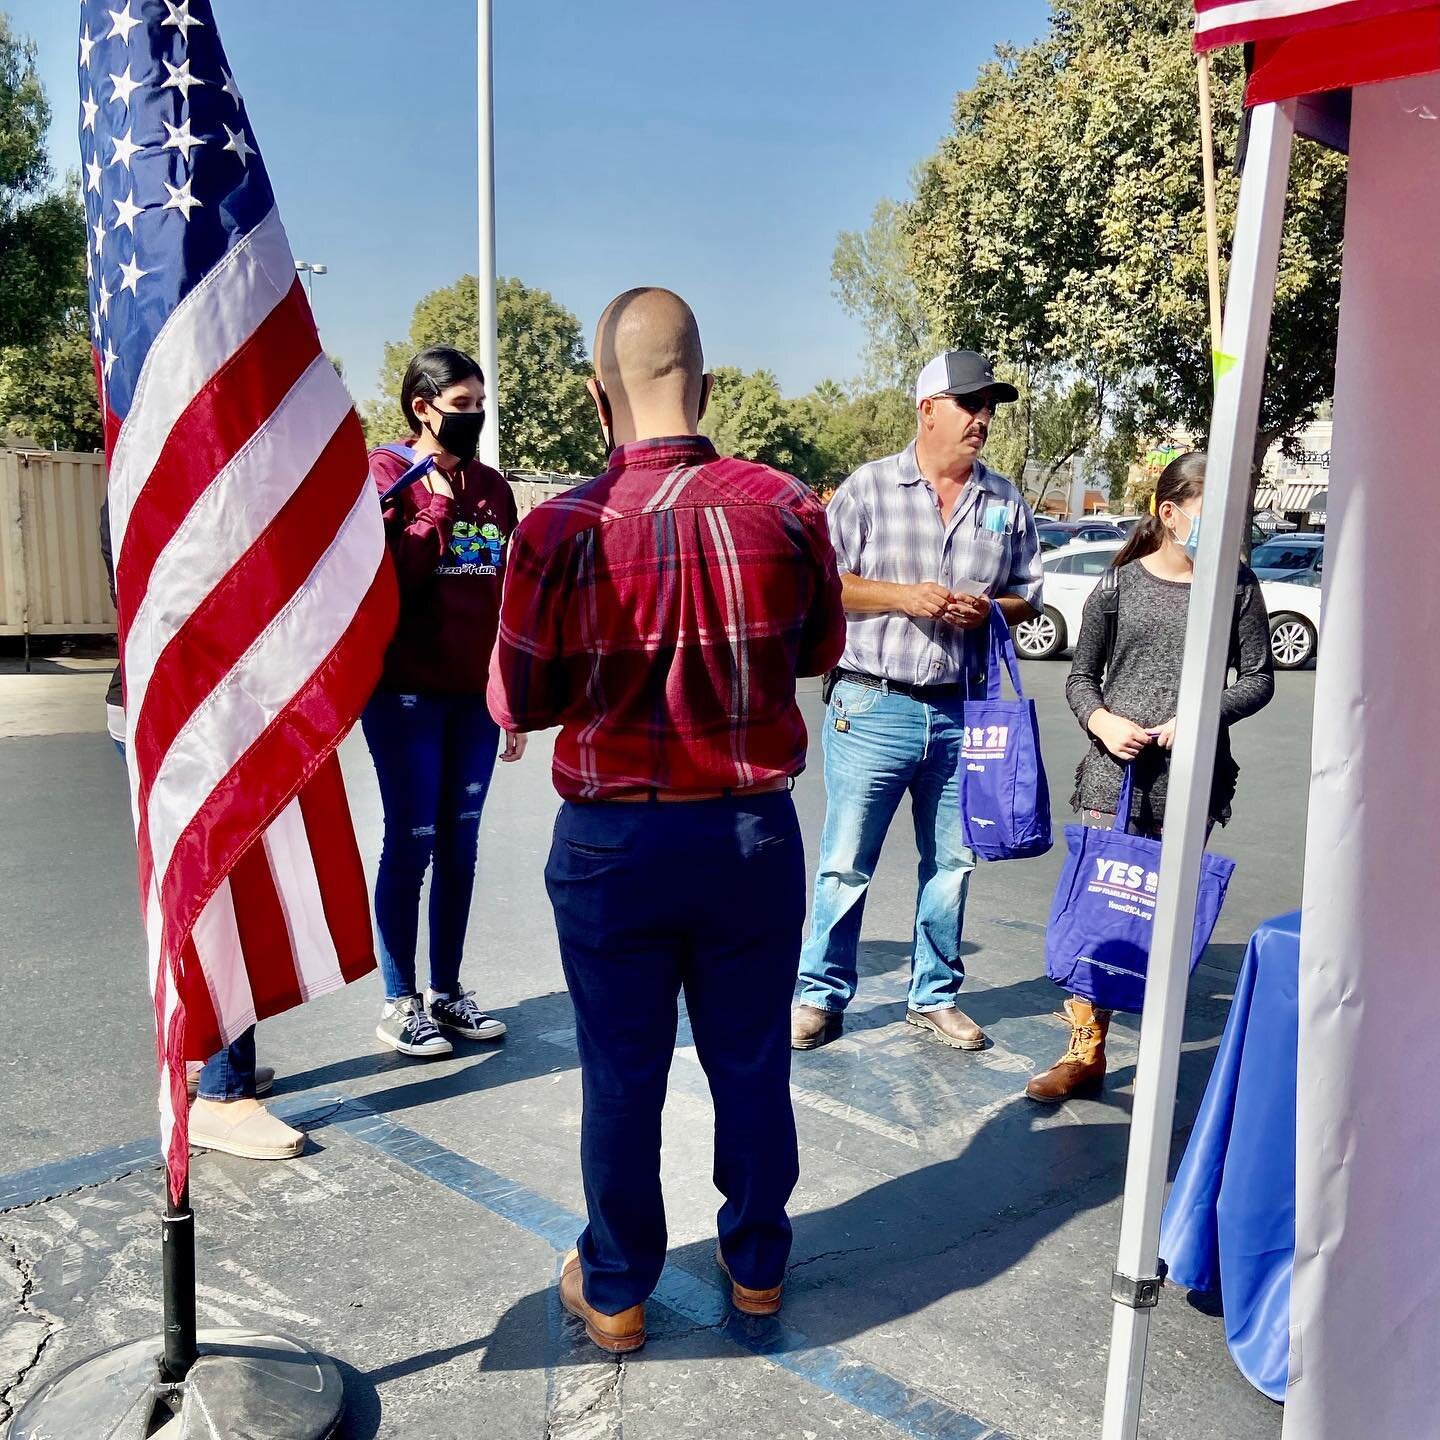 Great turnout in Visalia today.  We educated so many folks!  It was so rewarding to see people&rsquo;s reaction to what prop 21 will do to help folks.  Today we engaged with folks from every walk of life and after every conversation, there was a soli